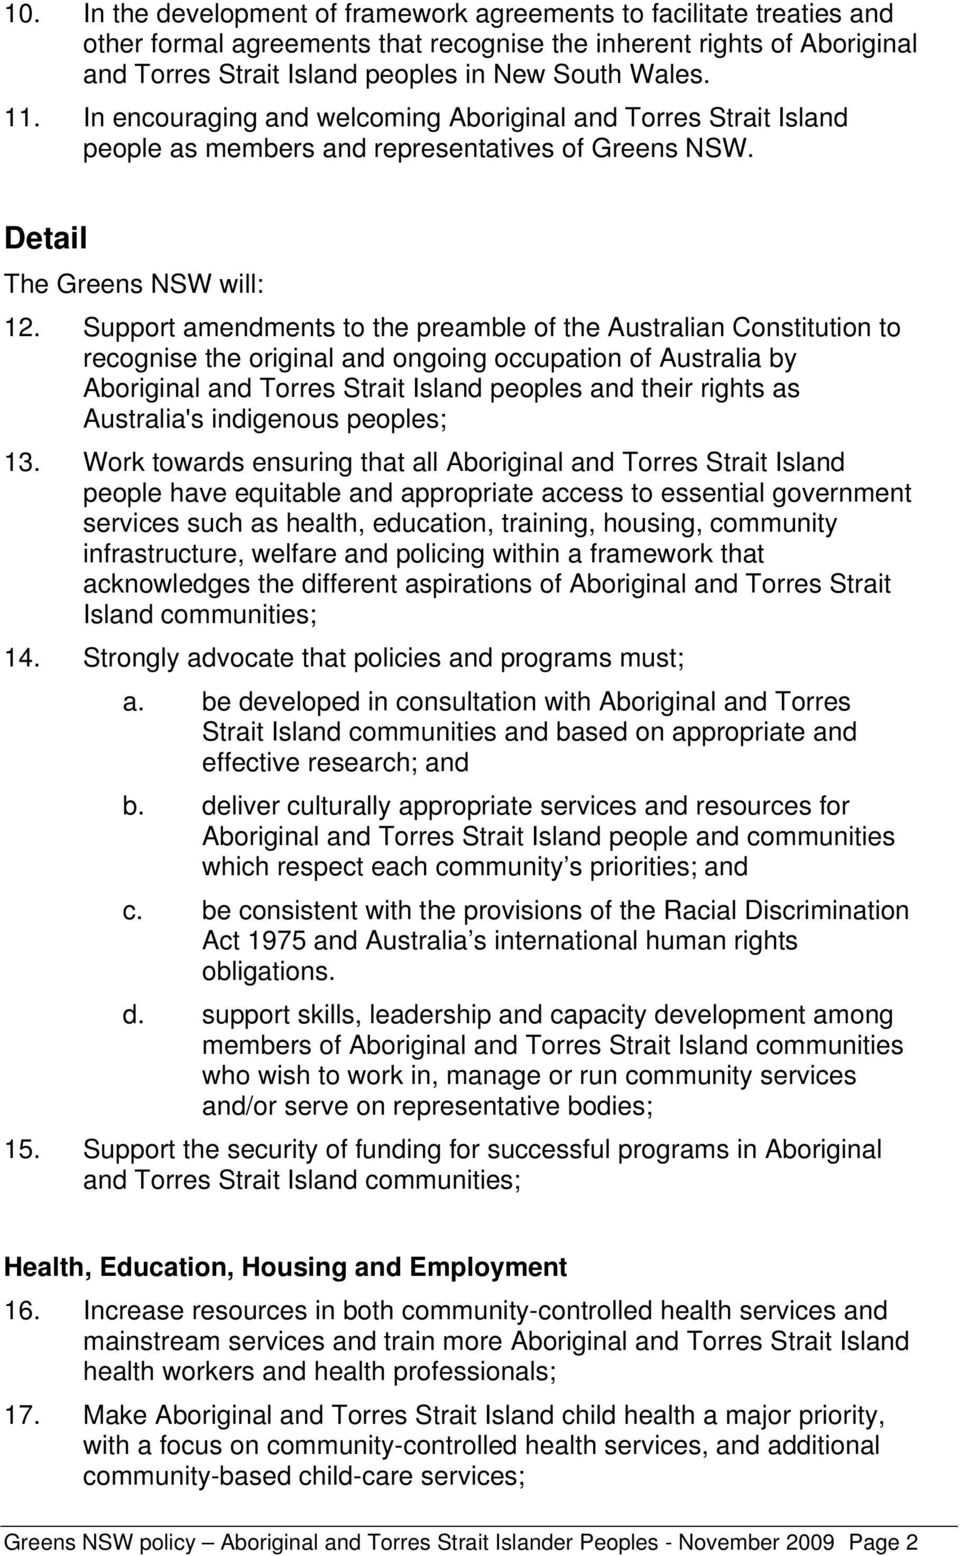 Support amendments to the preamble of the Australian Constitution to recognise the original and ongoing occupation of Australia by Aboriginal and Torres Strait Island peoples and their rights as